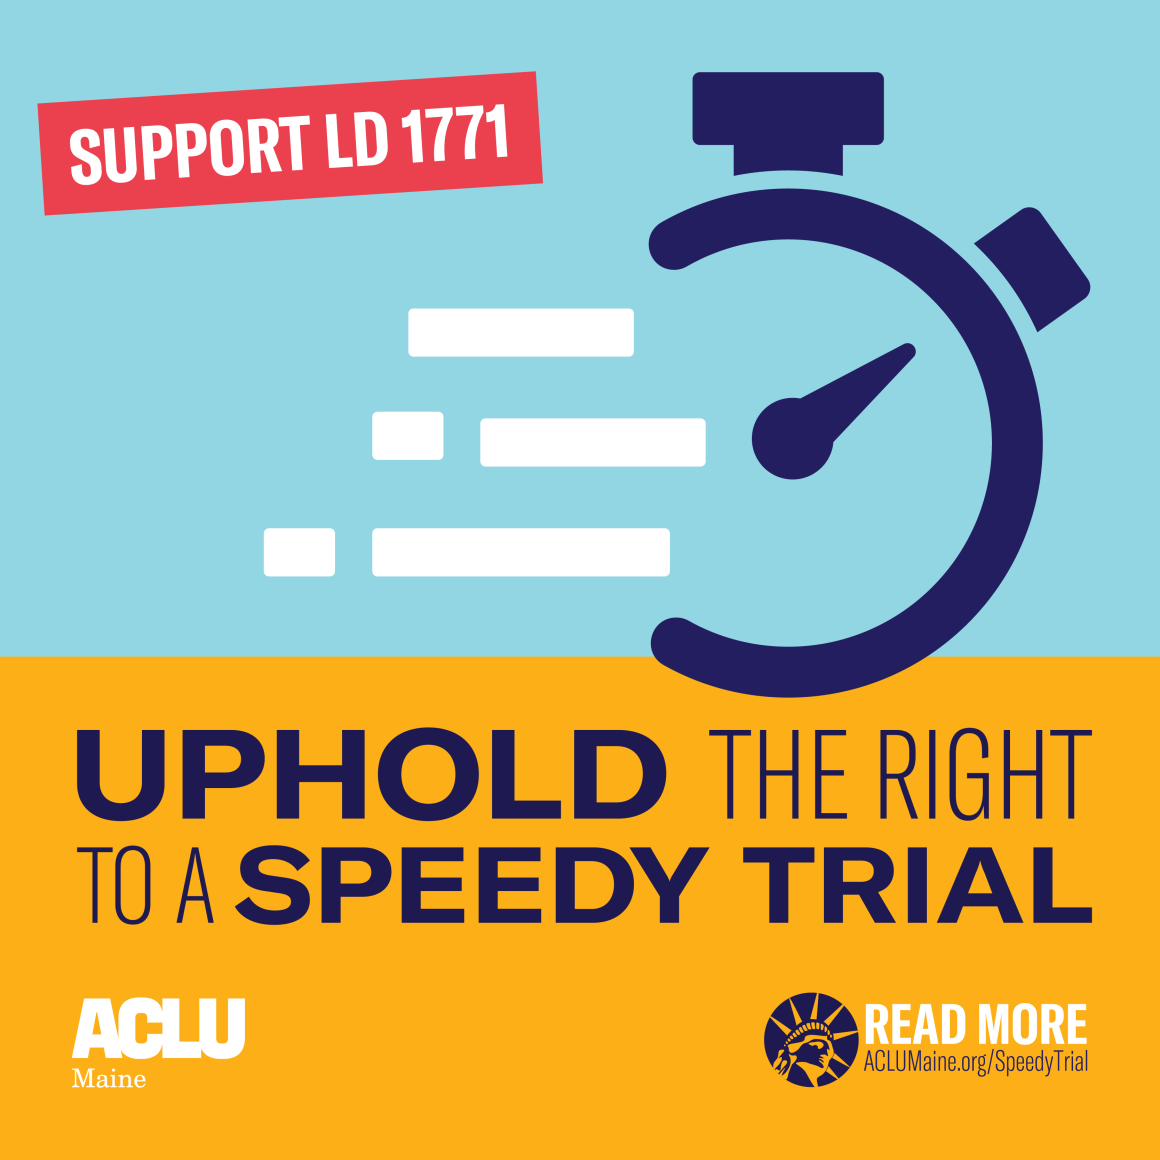 Uphold the right to a speedy trial. Support LD 1771.